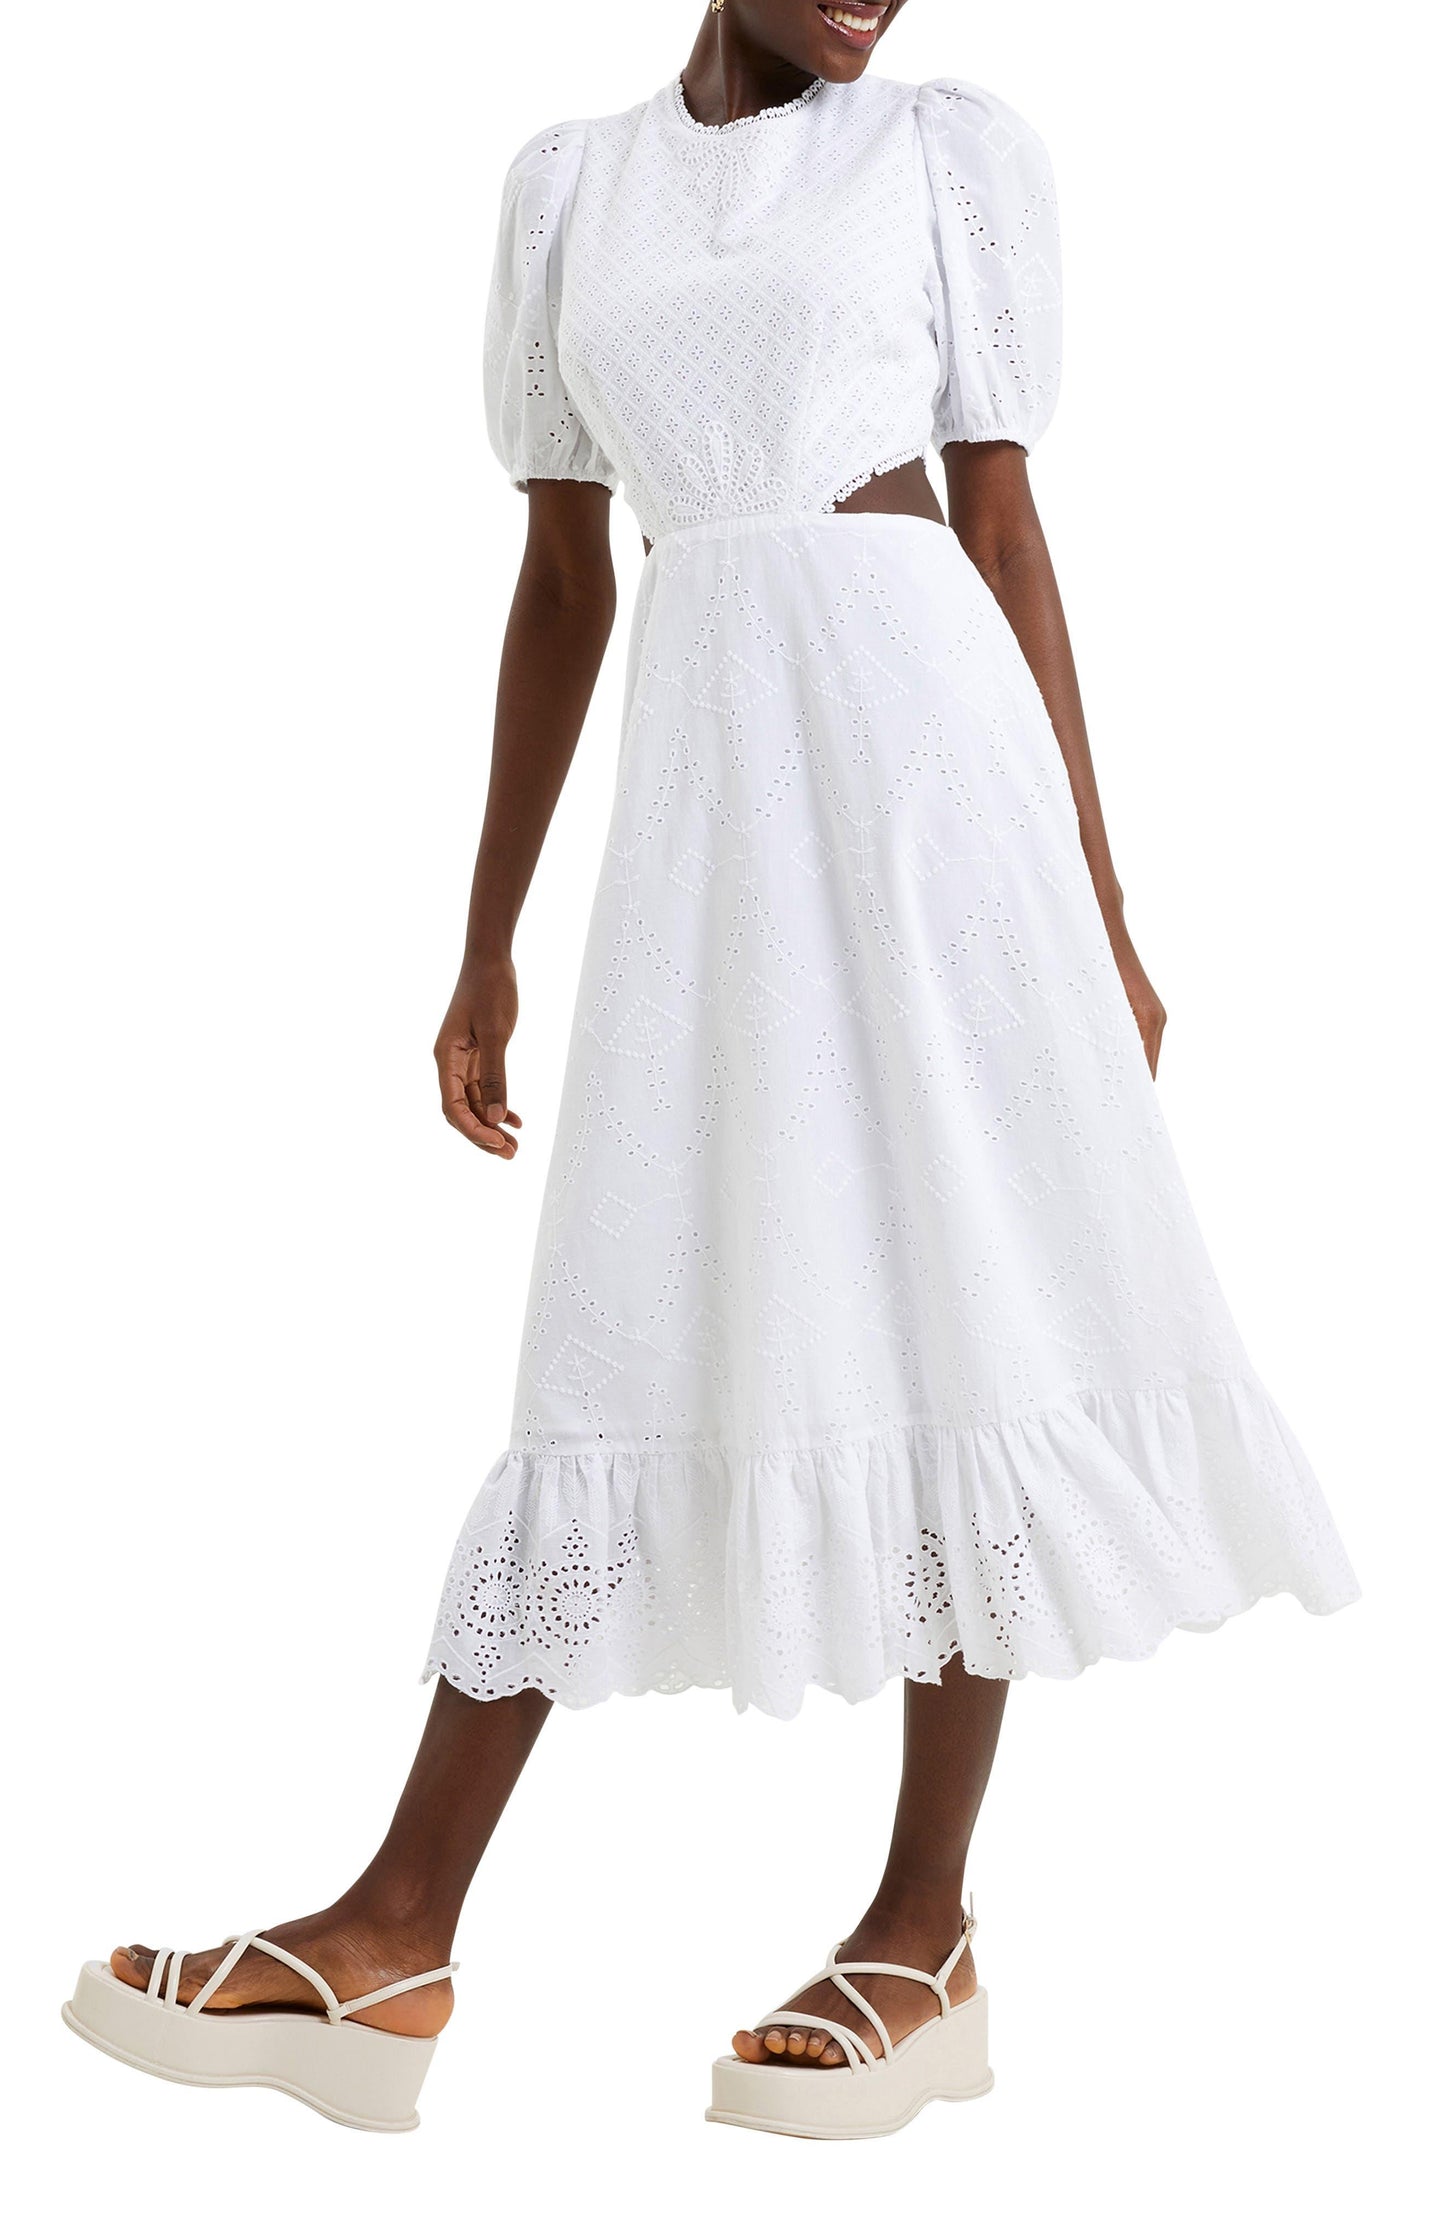 French Connection Women's Esse Eyelet Embroidered Cutout Cotton Dress, Summer White